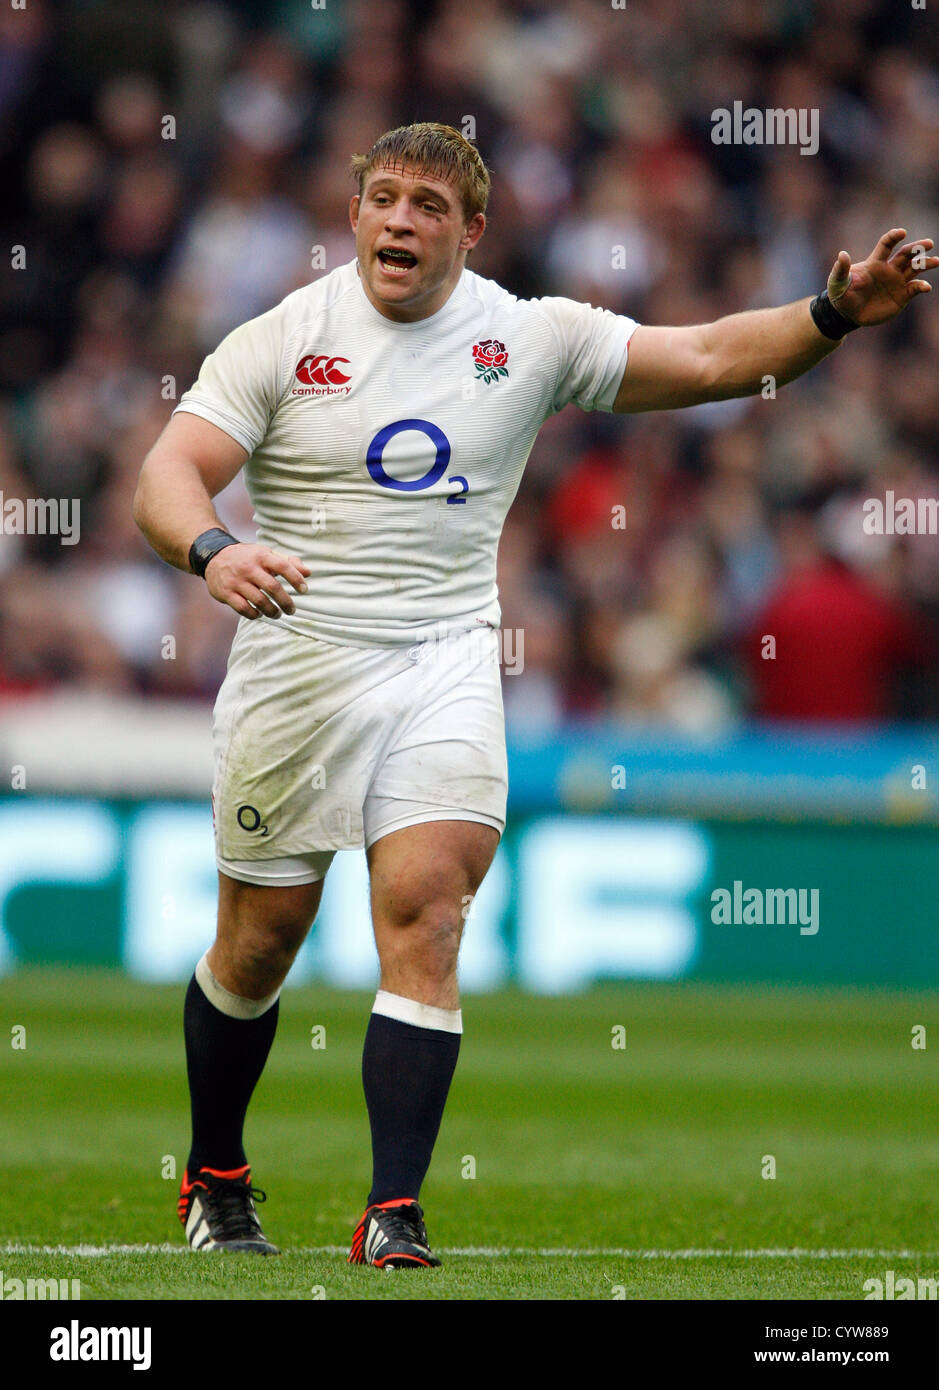 TOM YOUNGS ANGLETERRE V FIDJI TWICKENHAM MIDDLESEX ANGLETERRE RU 10 Novembre 2012 Banque D'Images